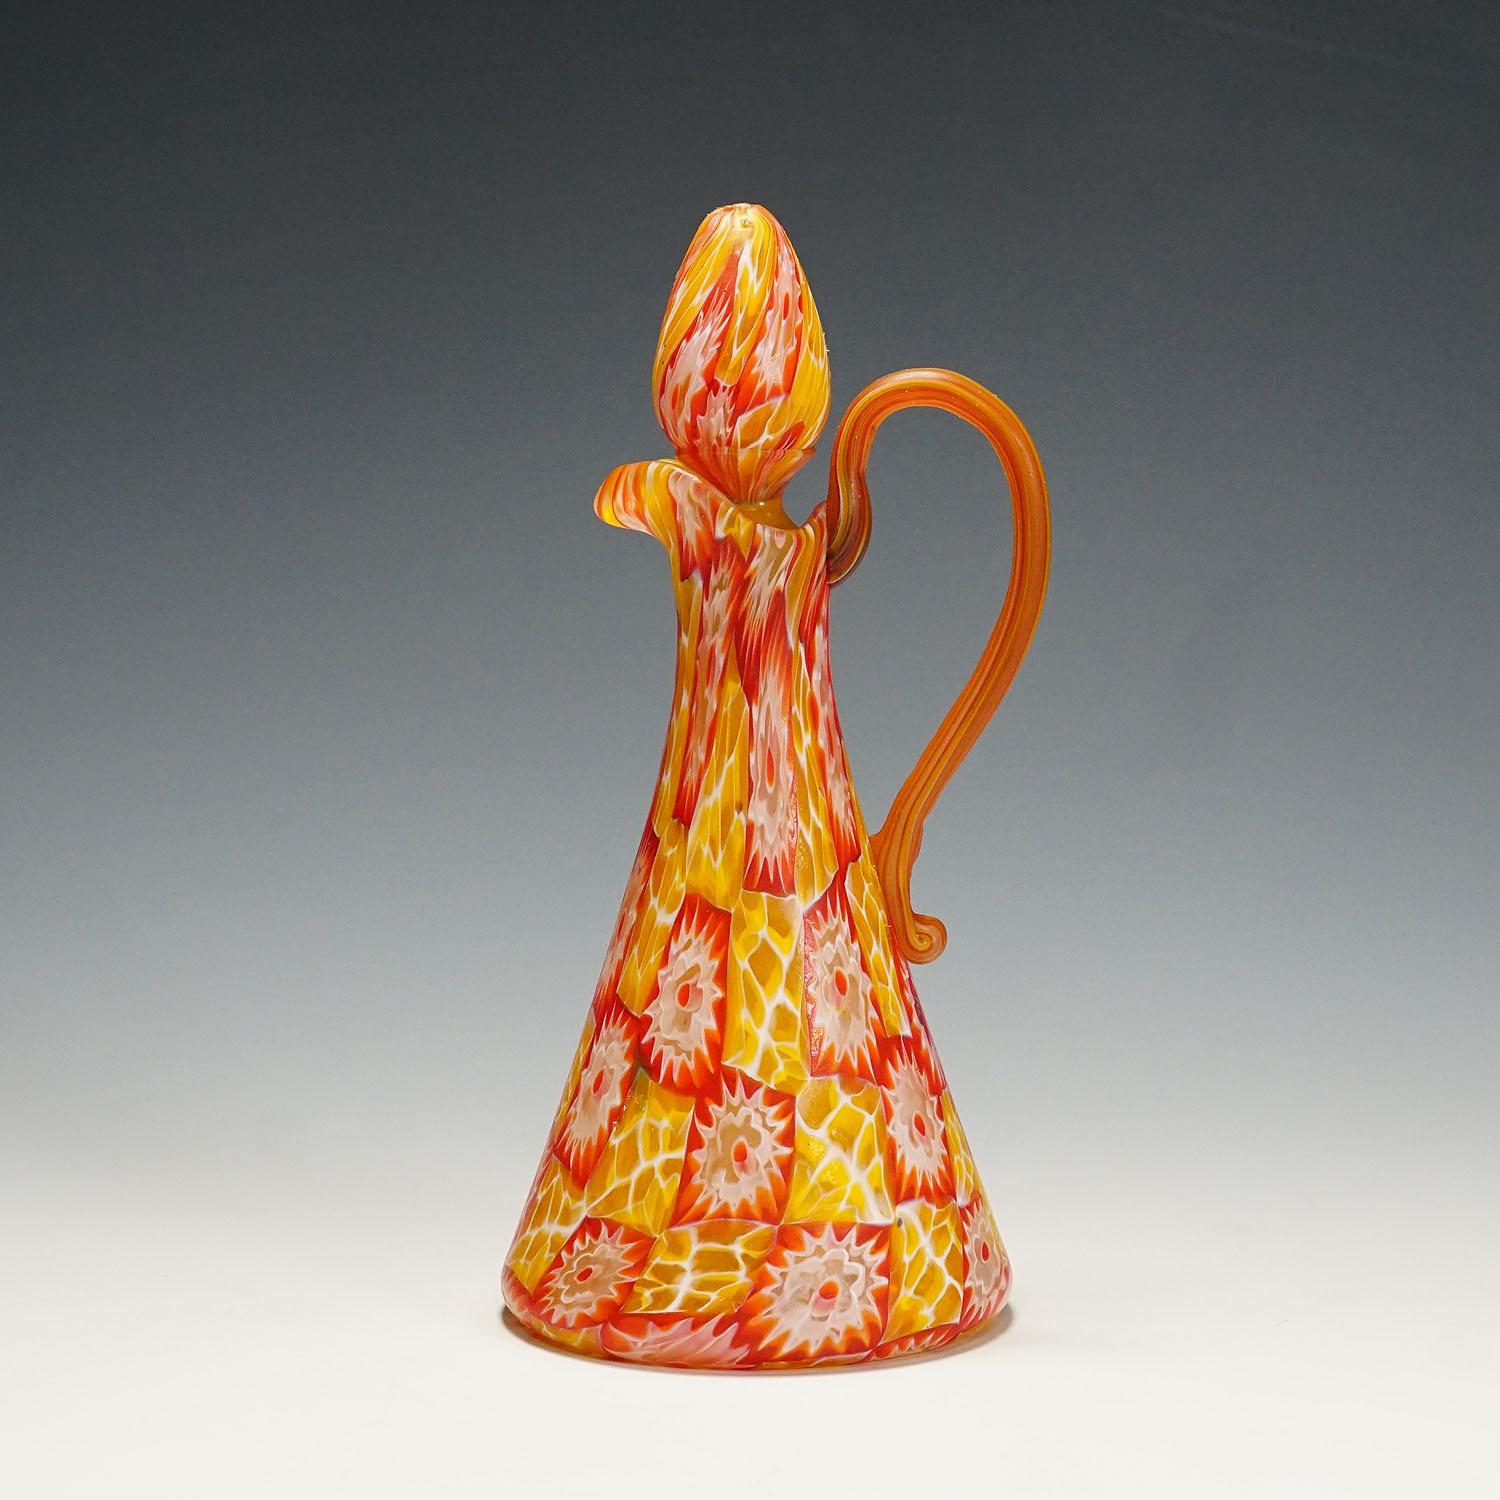 Antique Millefiori Jug with Handles by Fratelli Toso, Murano circa 1920

A rare Millefiore murrine glass jug, manufactured by Vetreria Fratelli Toso, Murano around 1920. Executed with polychrome murrines in red and orange and an acid etched matte